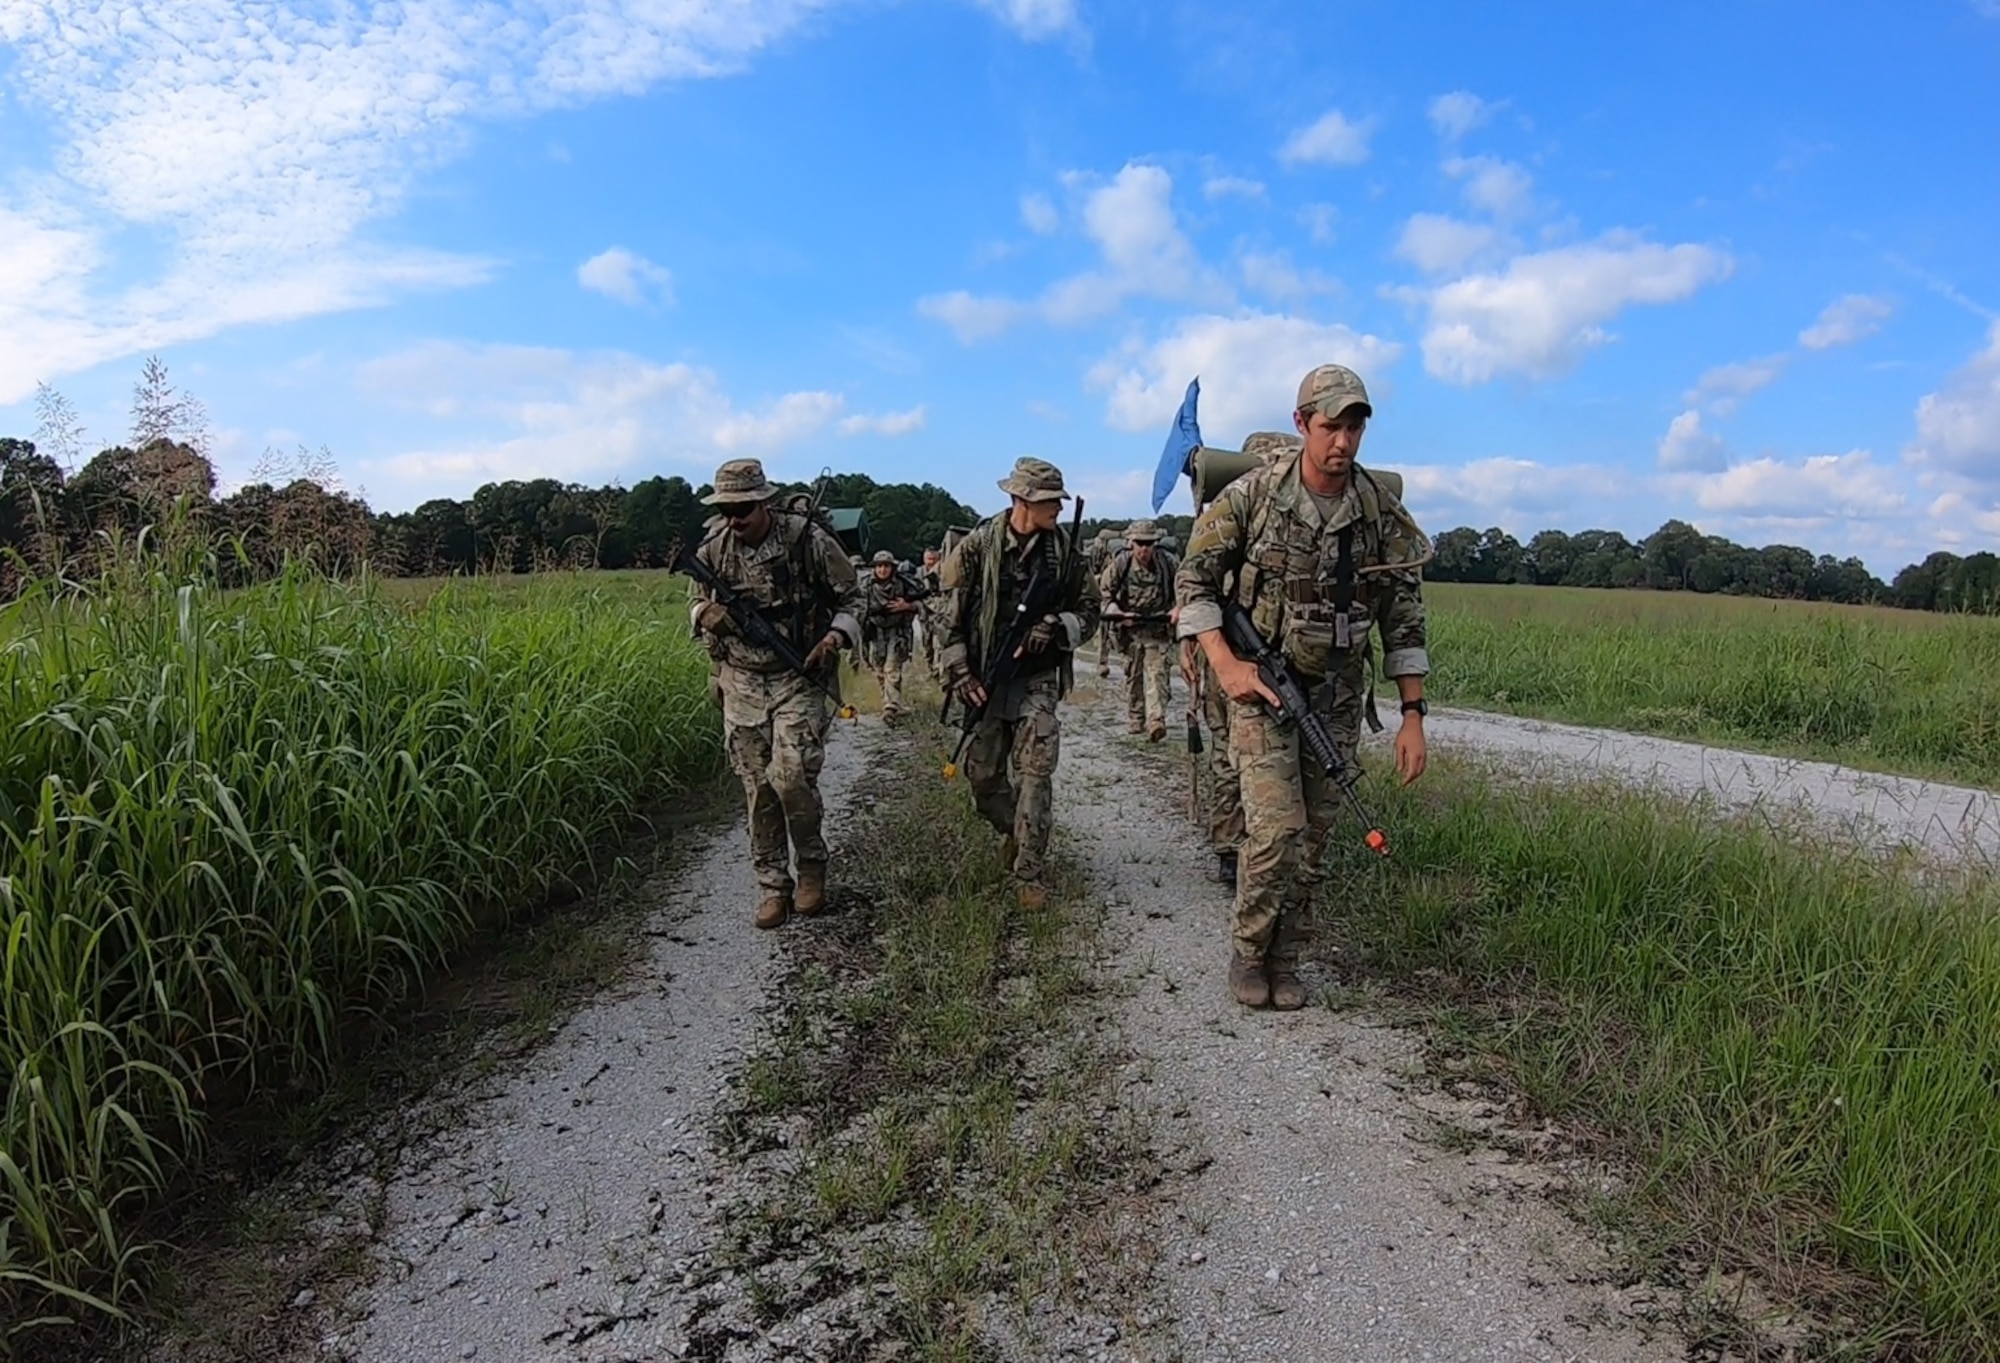 Security Forces Airmen assigned to the 164th Airlift Wing hosted an annual two-week patrol course at Milan’s Volunteer Training Site in Lavinia, Tennessee, Aug. 6-20 to strengthen relations with their Bulgarian counterparts and reinforce airbase ground defense skills.